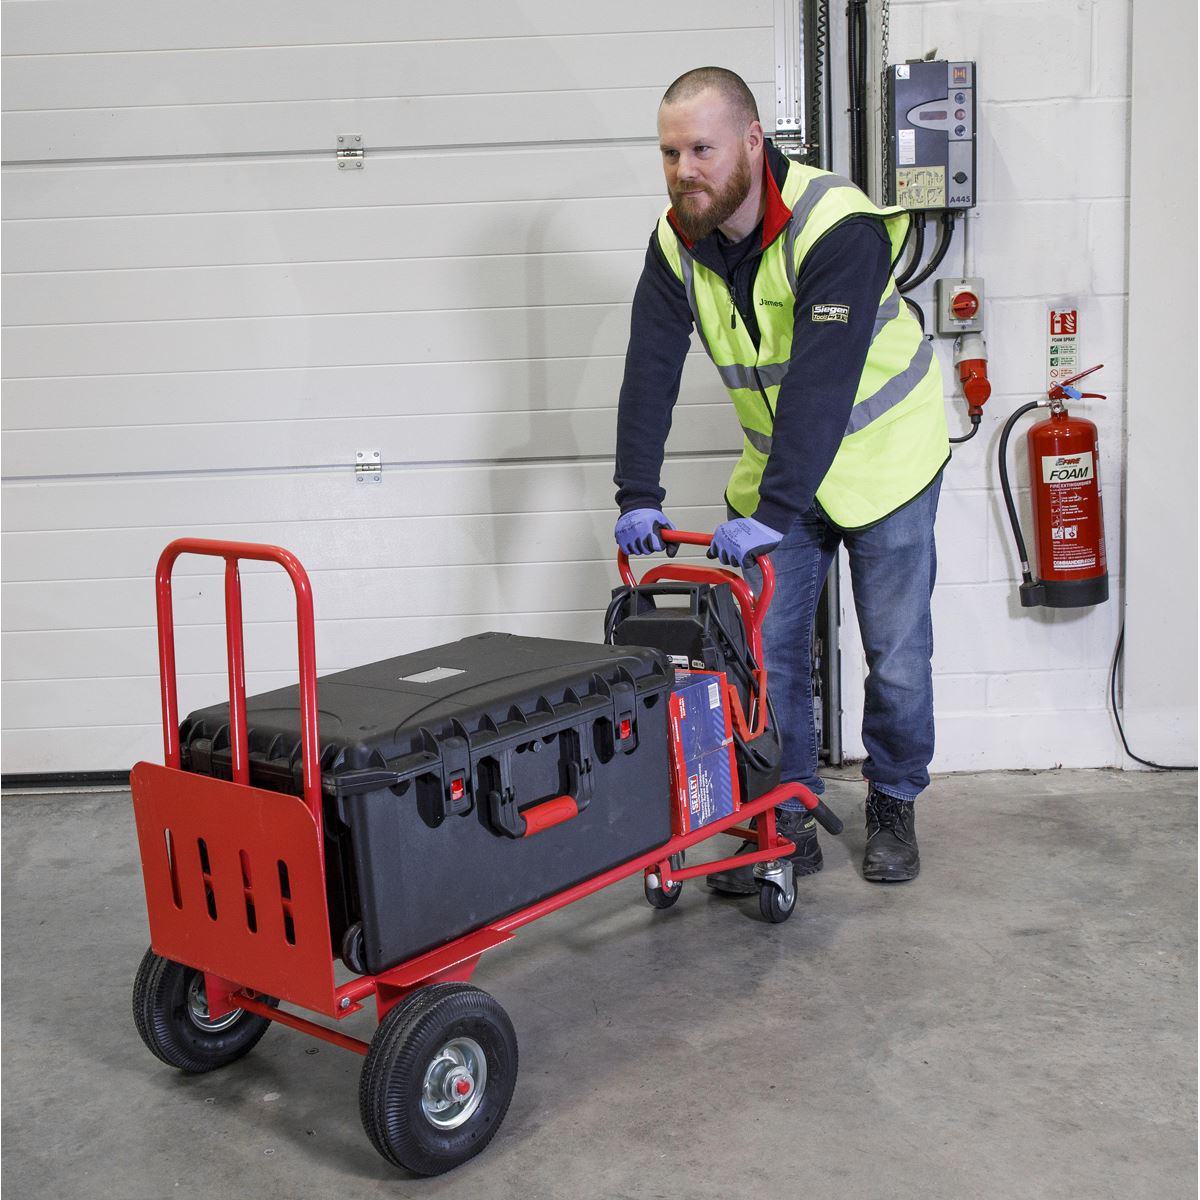 Sealey Sack Truck 3-in-1 with Pneumatic Tyres 250kg Capacity